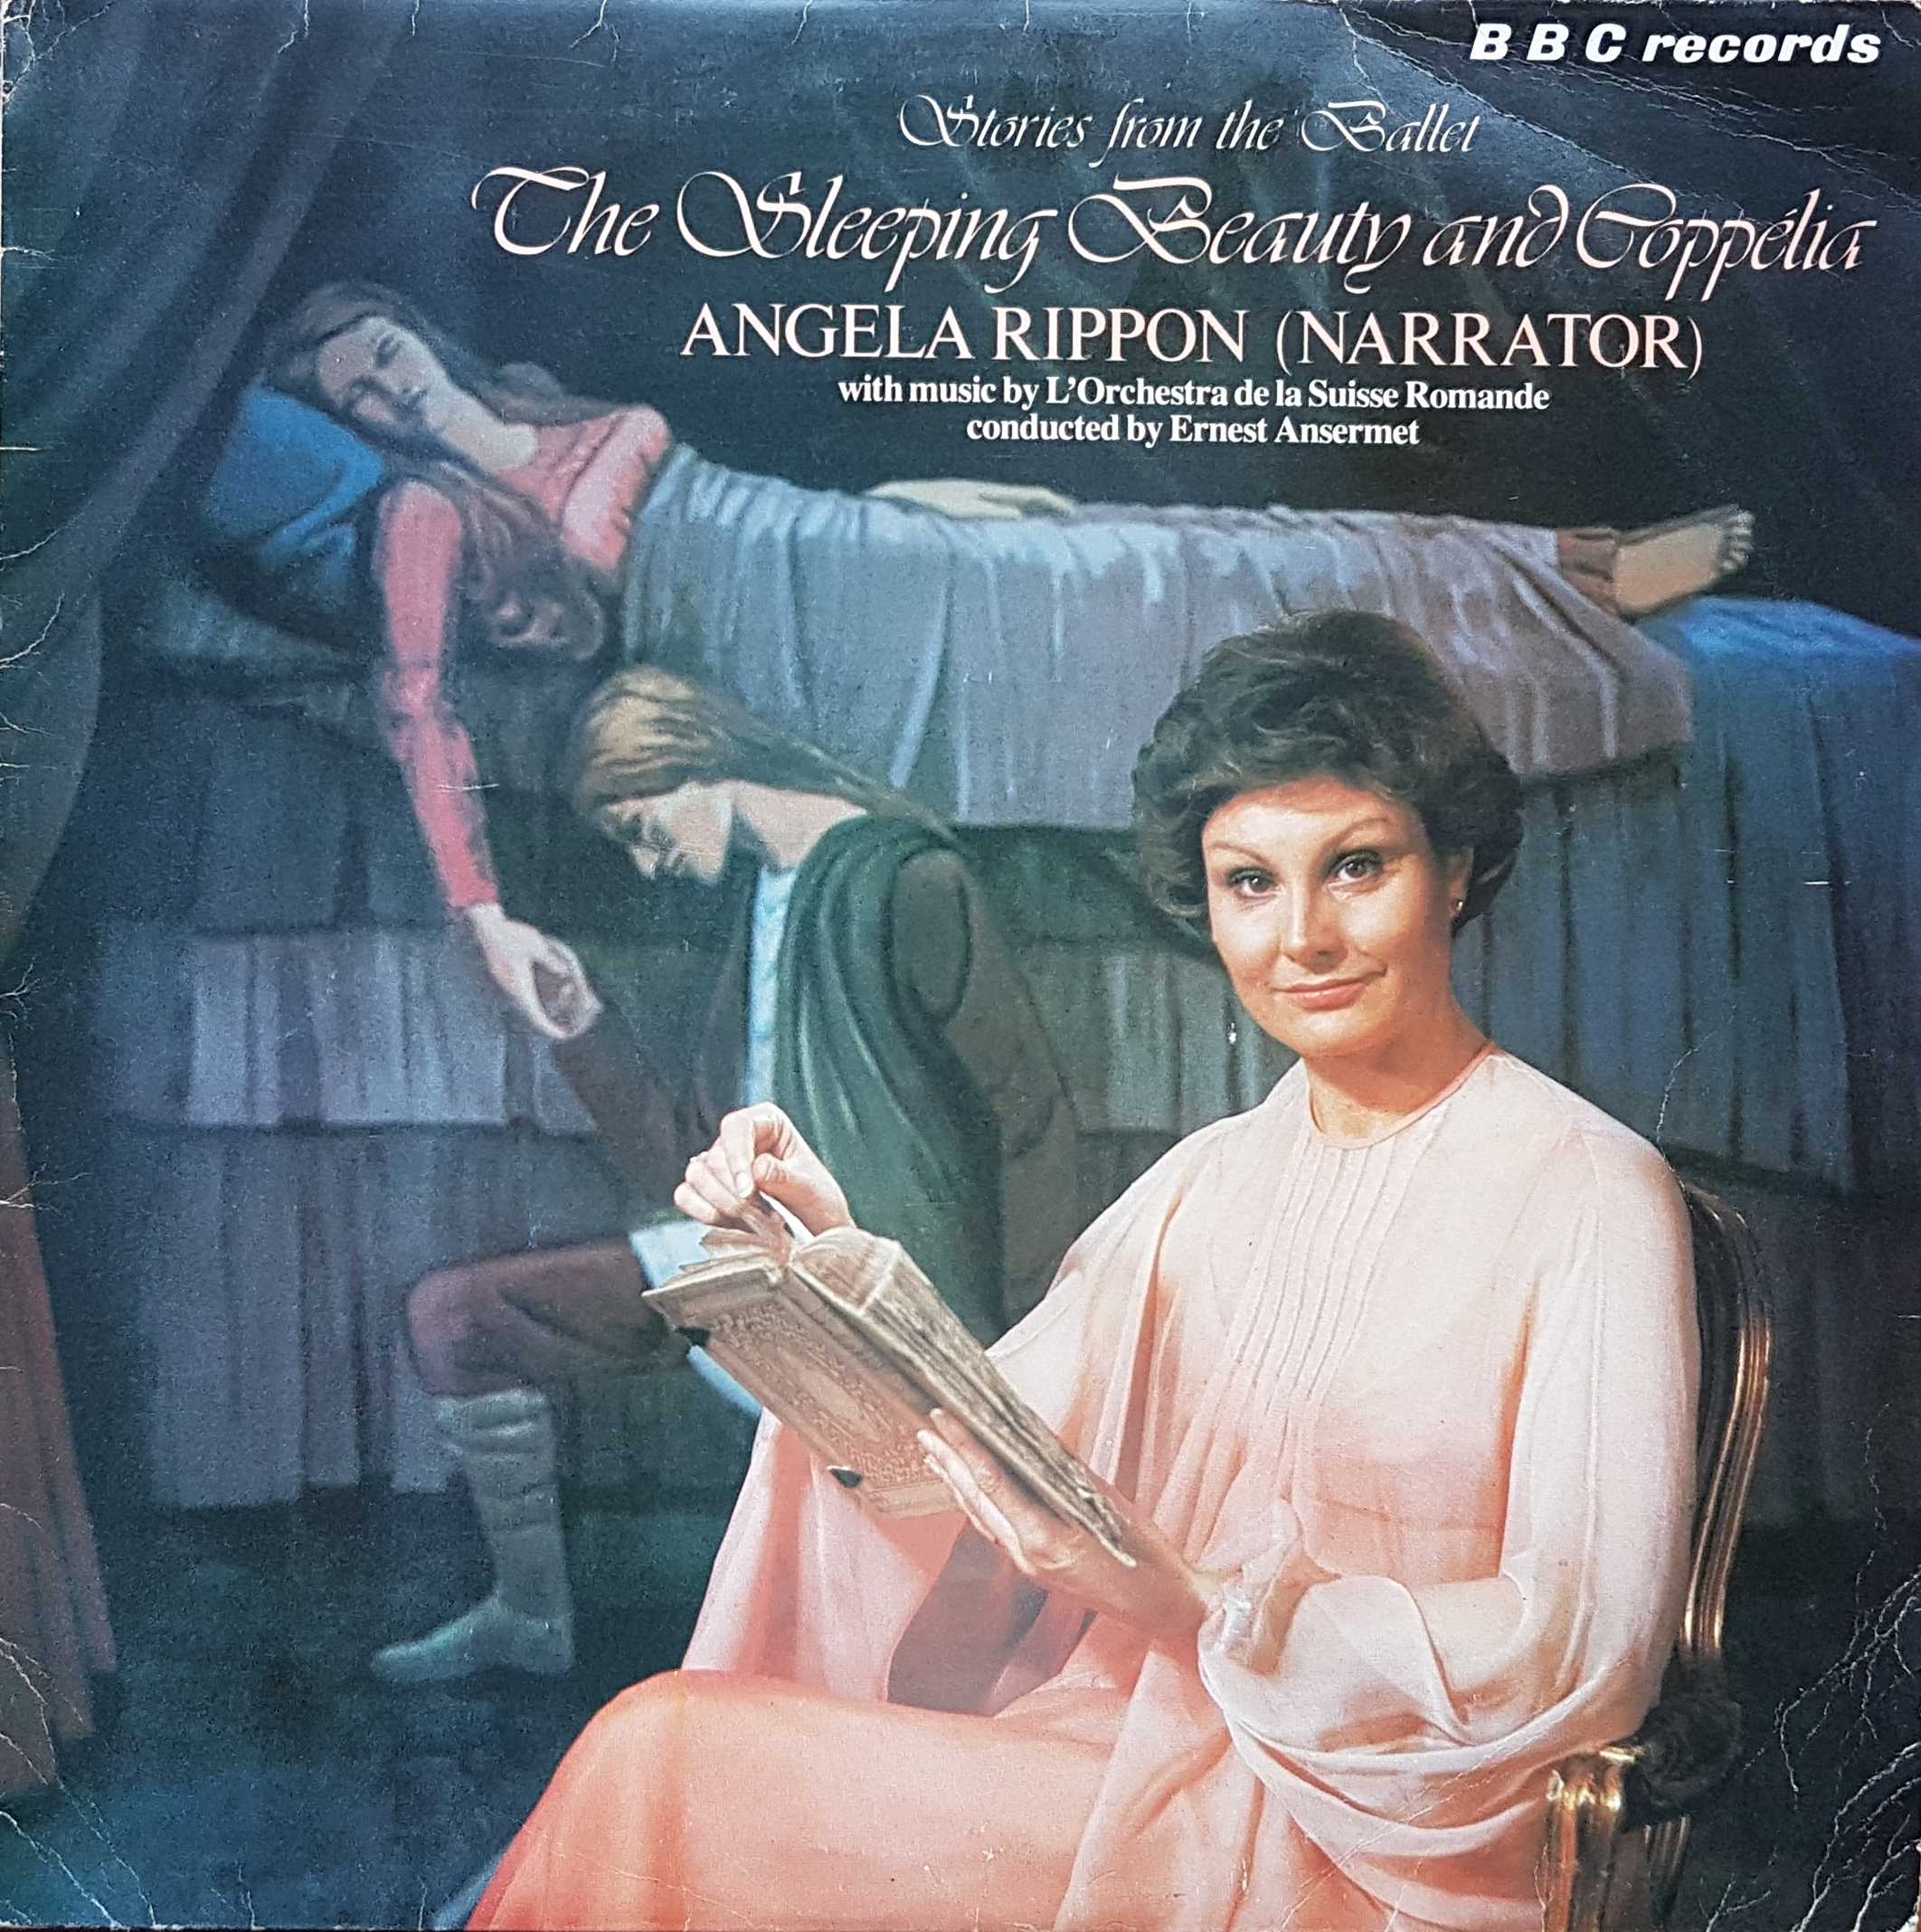 Picture of REC 344 Stories from the Ballet: The Sleeping Beauty and Coppelia by artist Angela Rippon from the BBC albums - Records and Tapes library